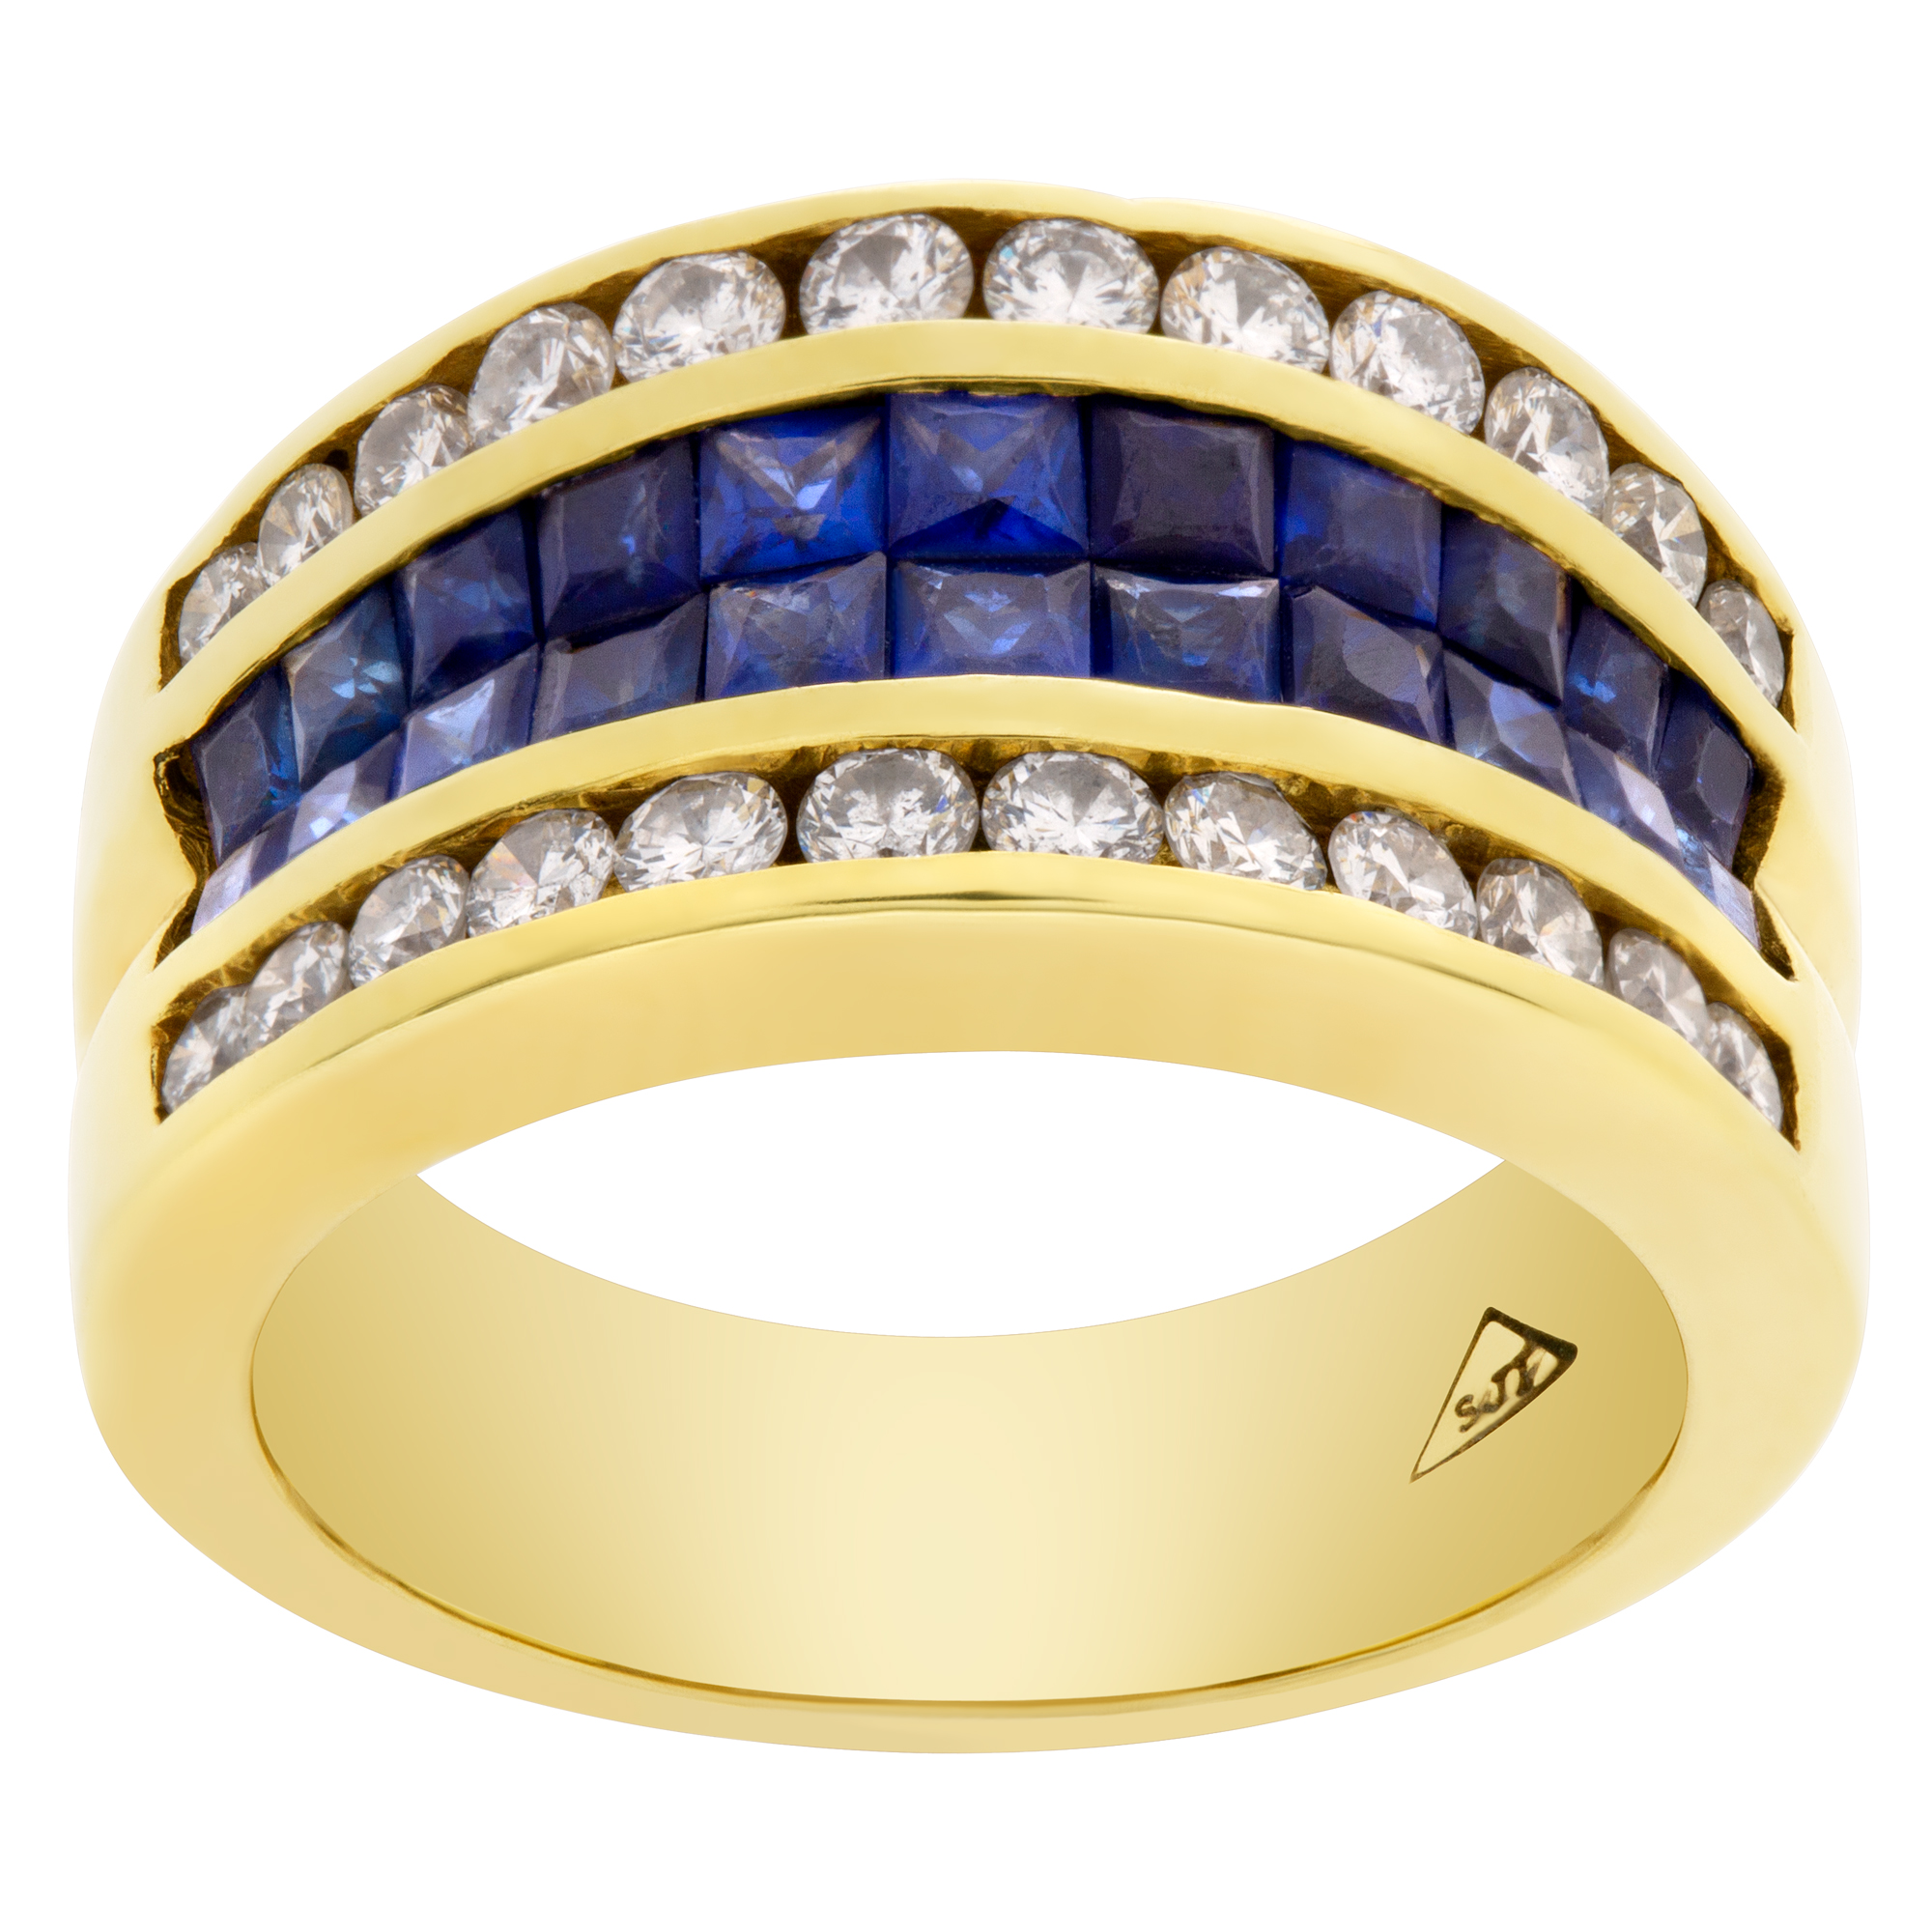 Diamond & sapphire ring in 18k yellow gold. Size 7.25. image 1